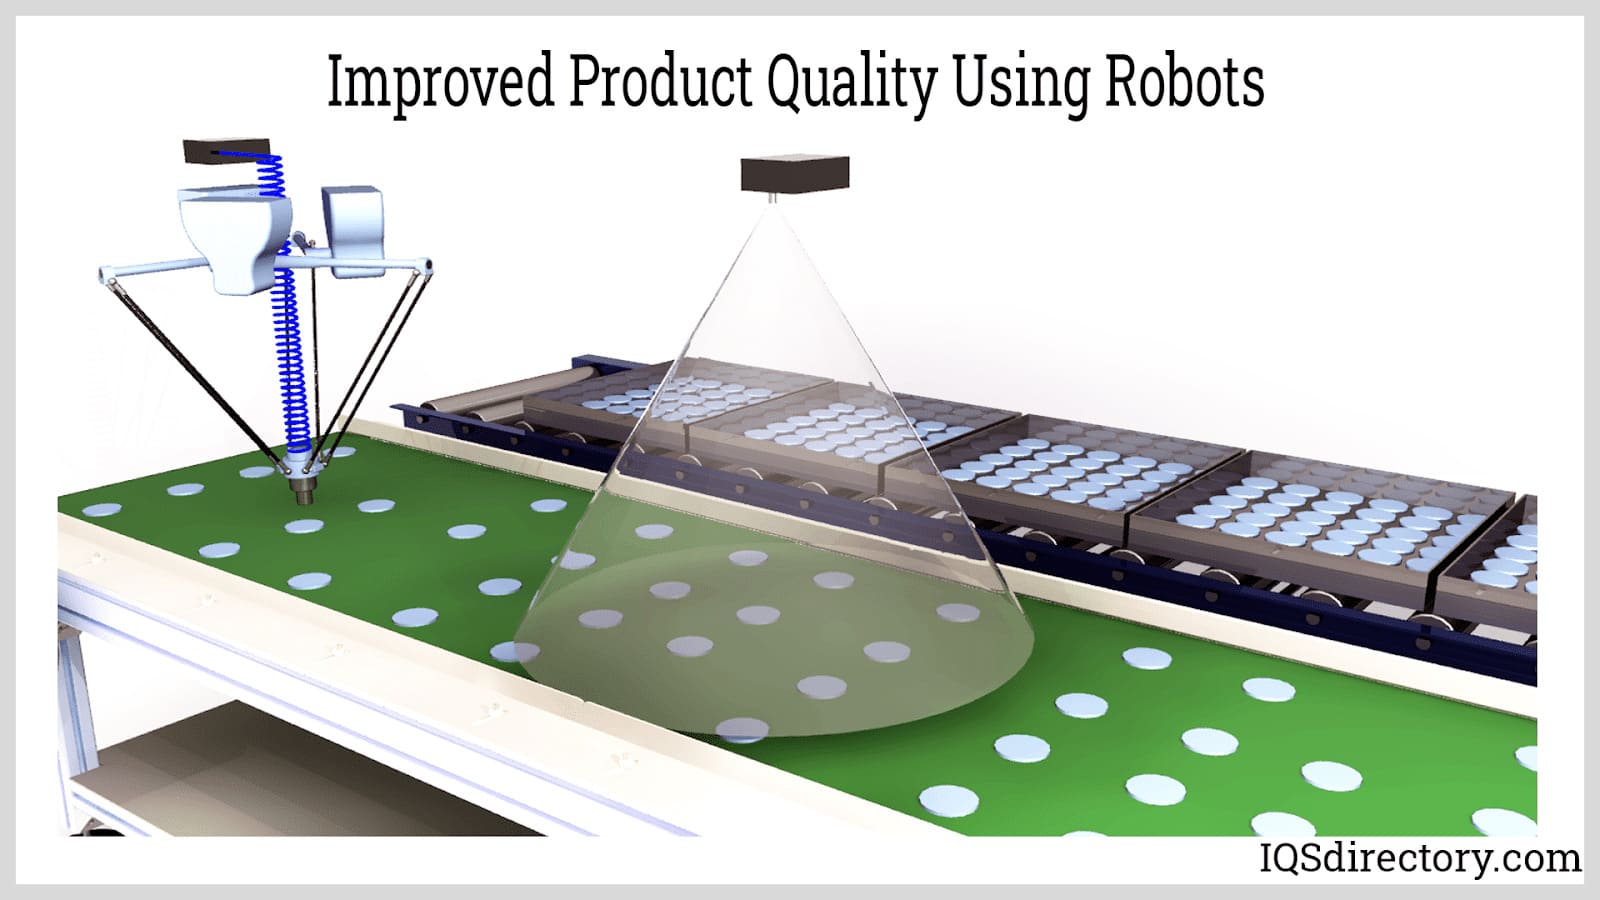 Improved Product Quality Using Robots